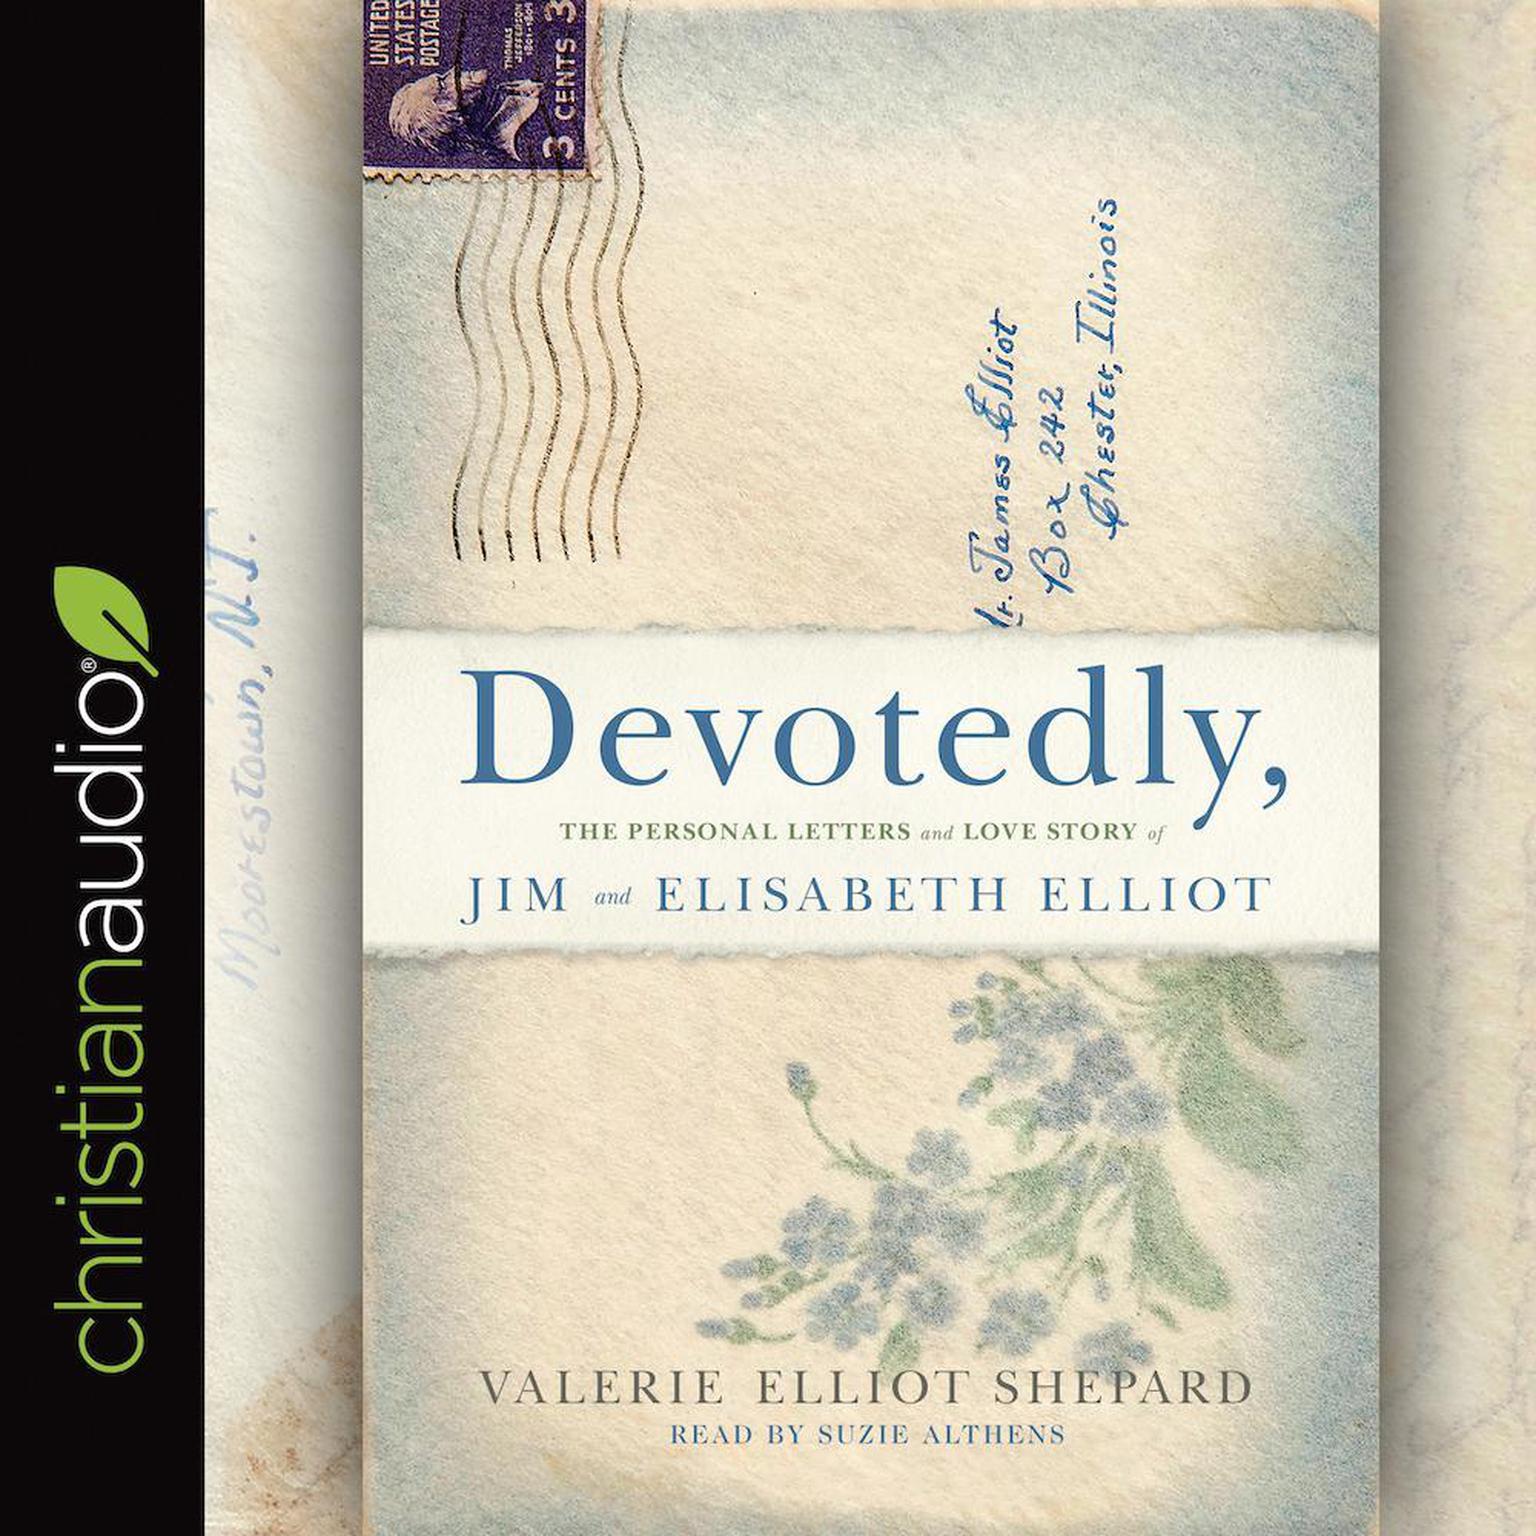 Devotedly: The Personal Letters and Love Story of Jim and Elisabeth Elliot Audiobook, by Valerie Elliot Shepard